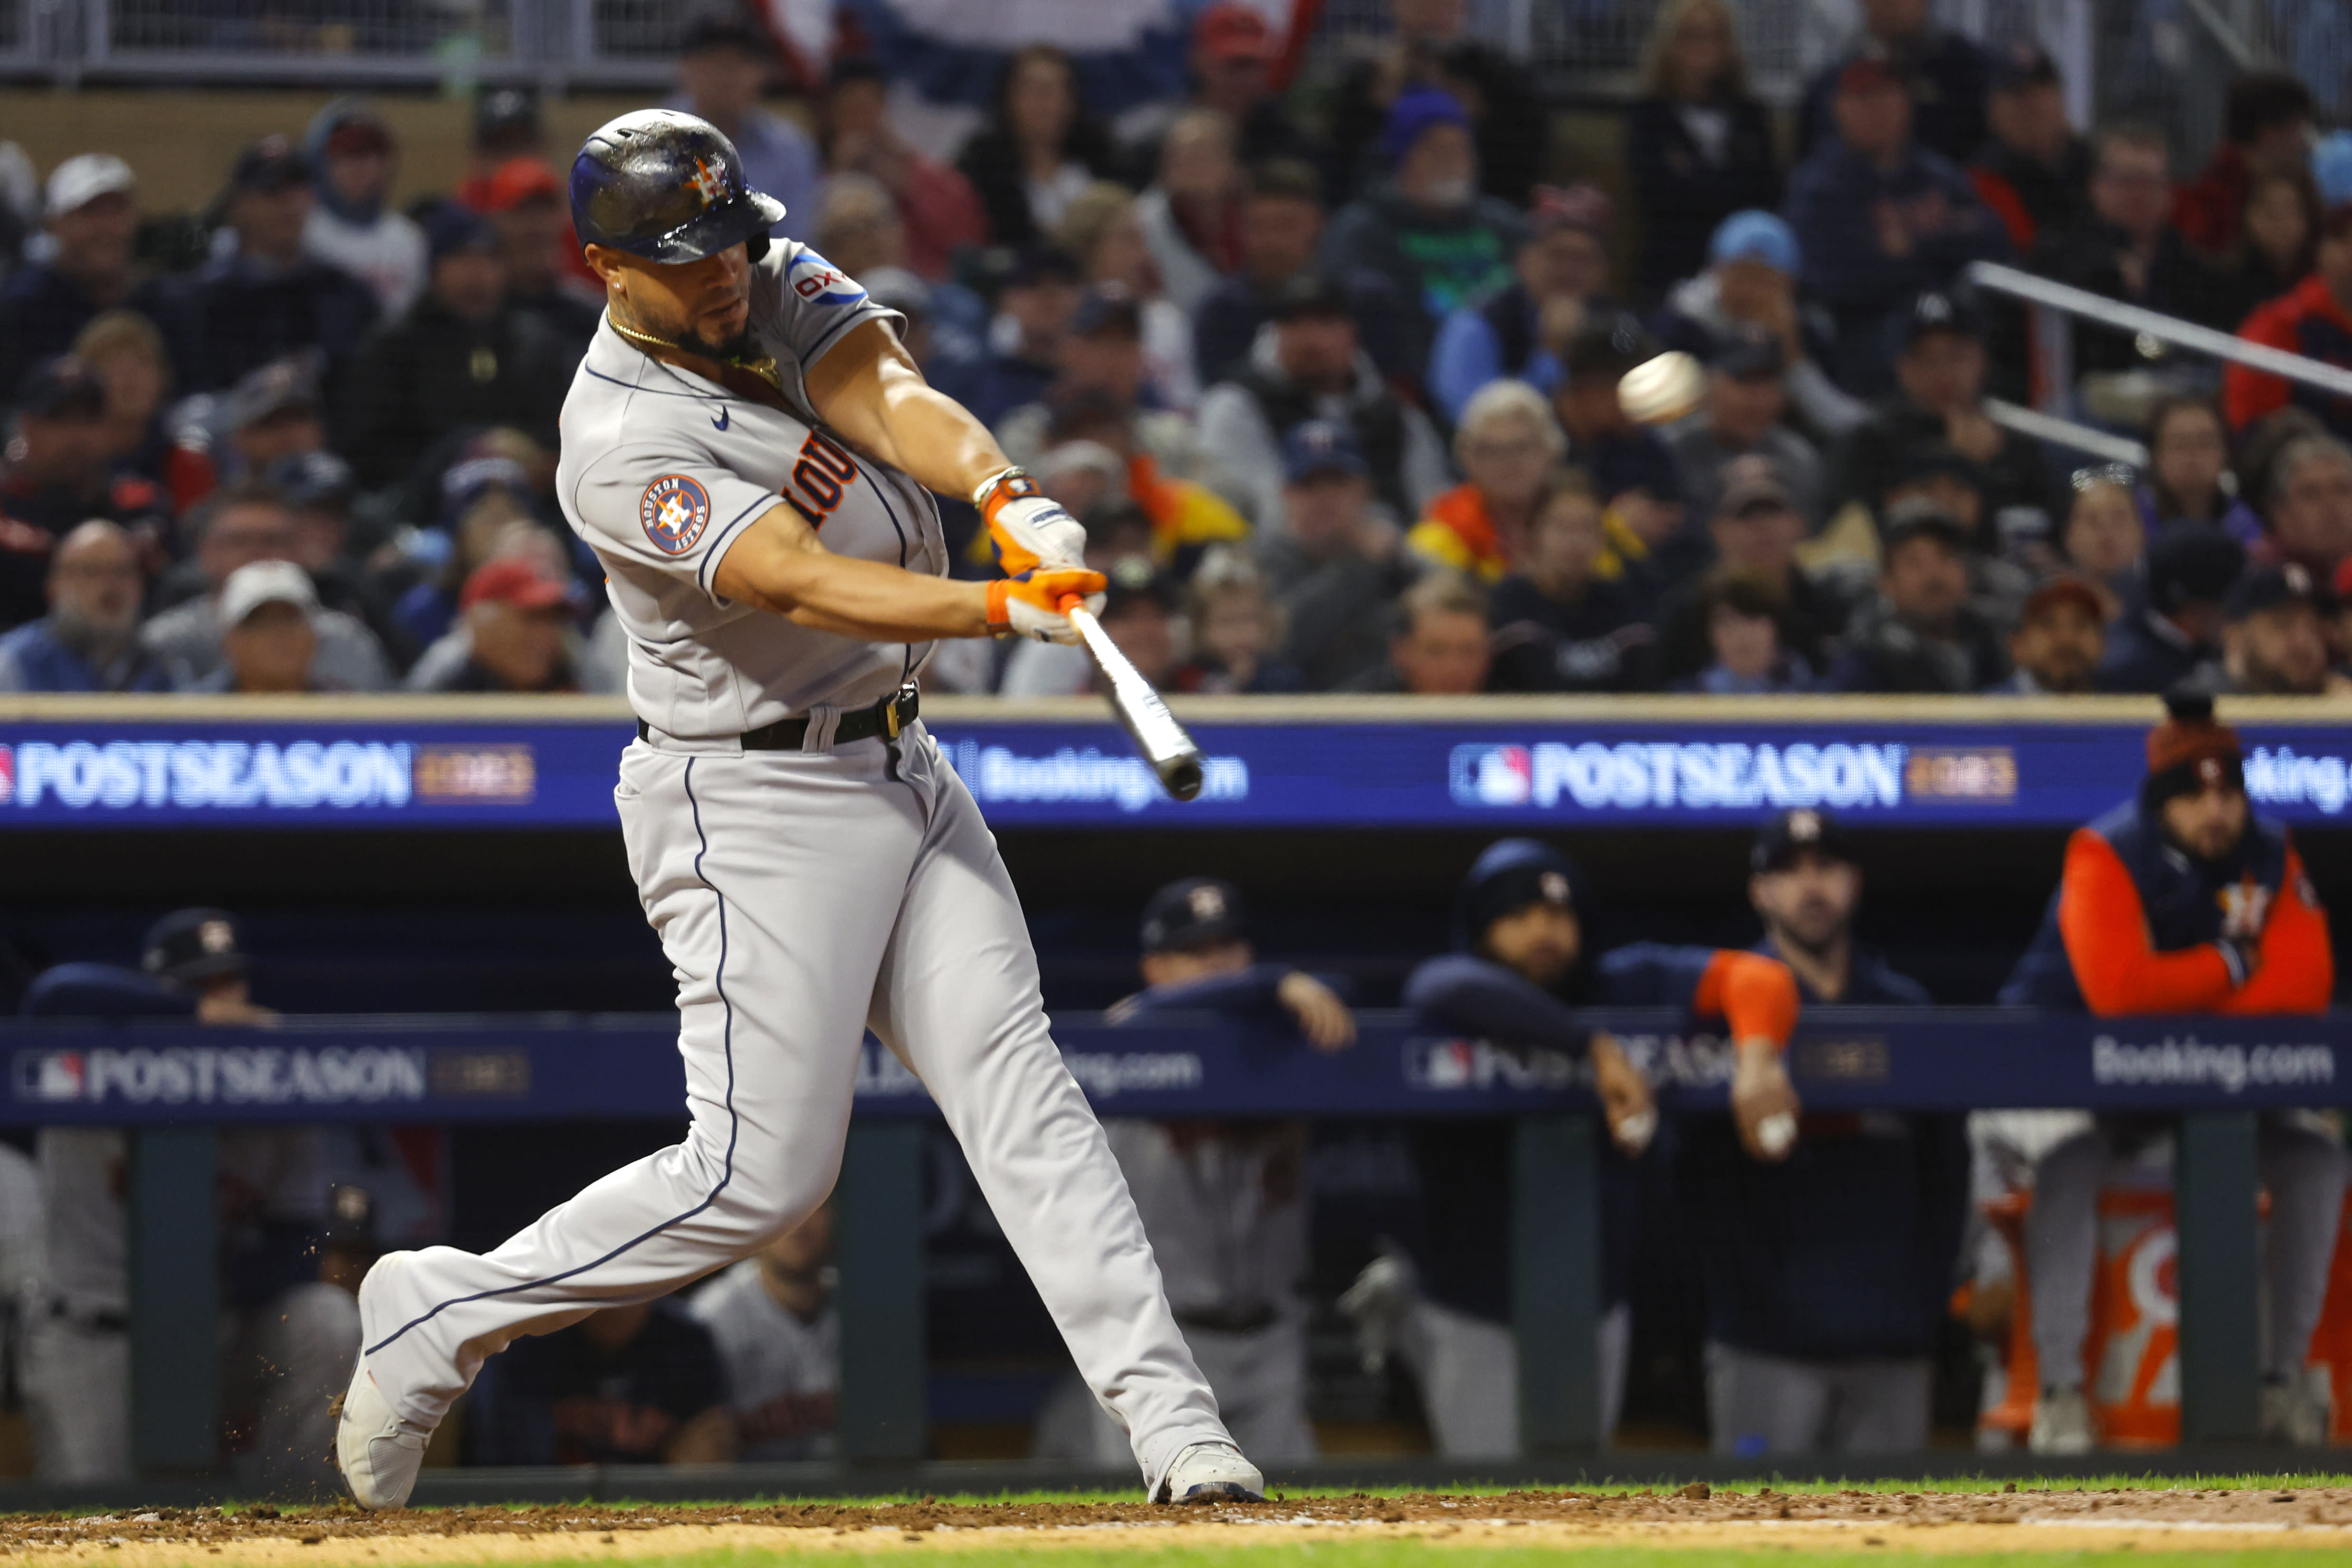 ALCS Loss To Astros Inspires Yankees For A Big 2023 Season